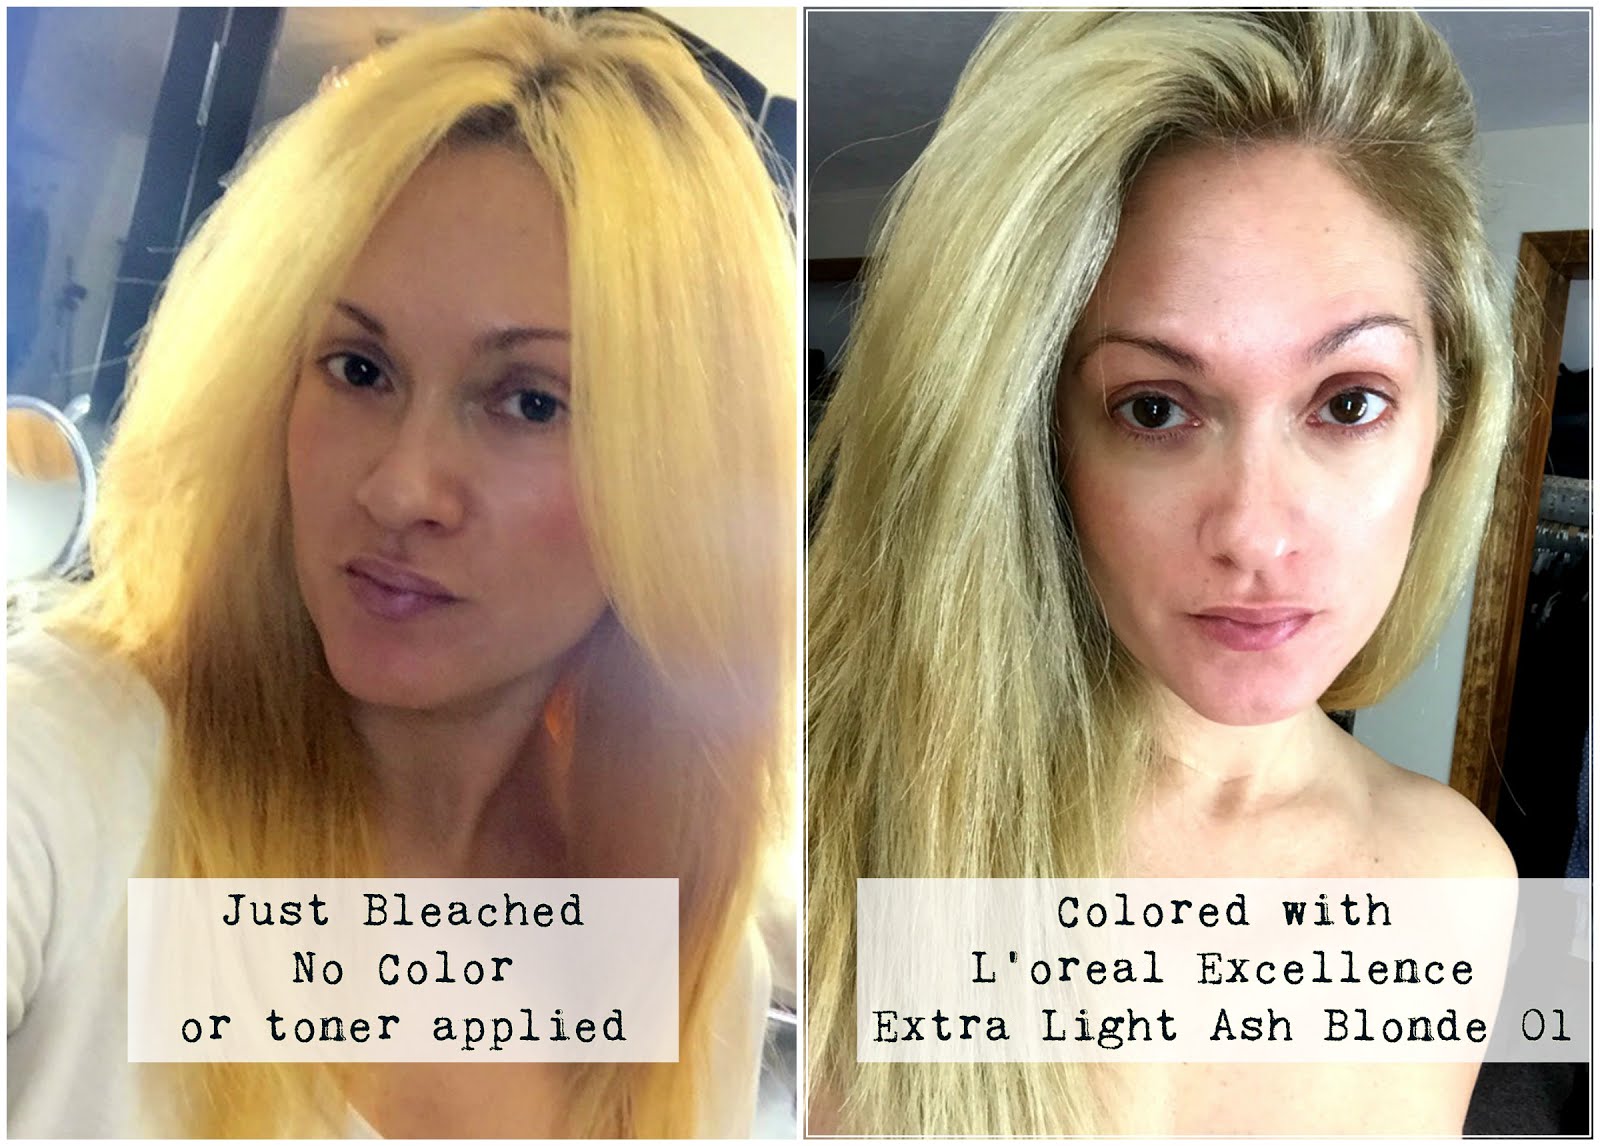 BEAUTY101BYLISA: DIY At Home - NATURAL HAIR LIGHTENING & COLOR REMOVAL